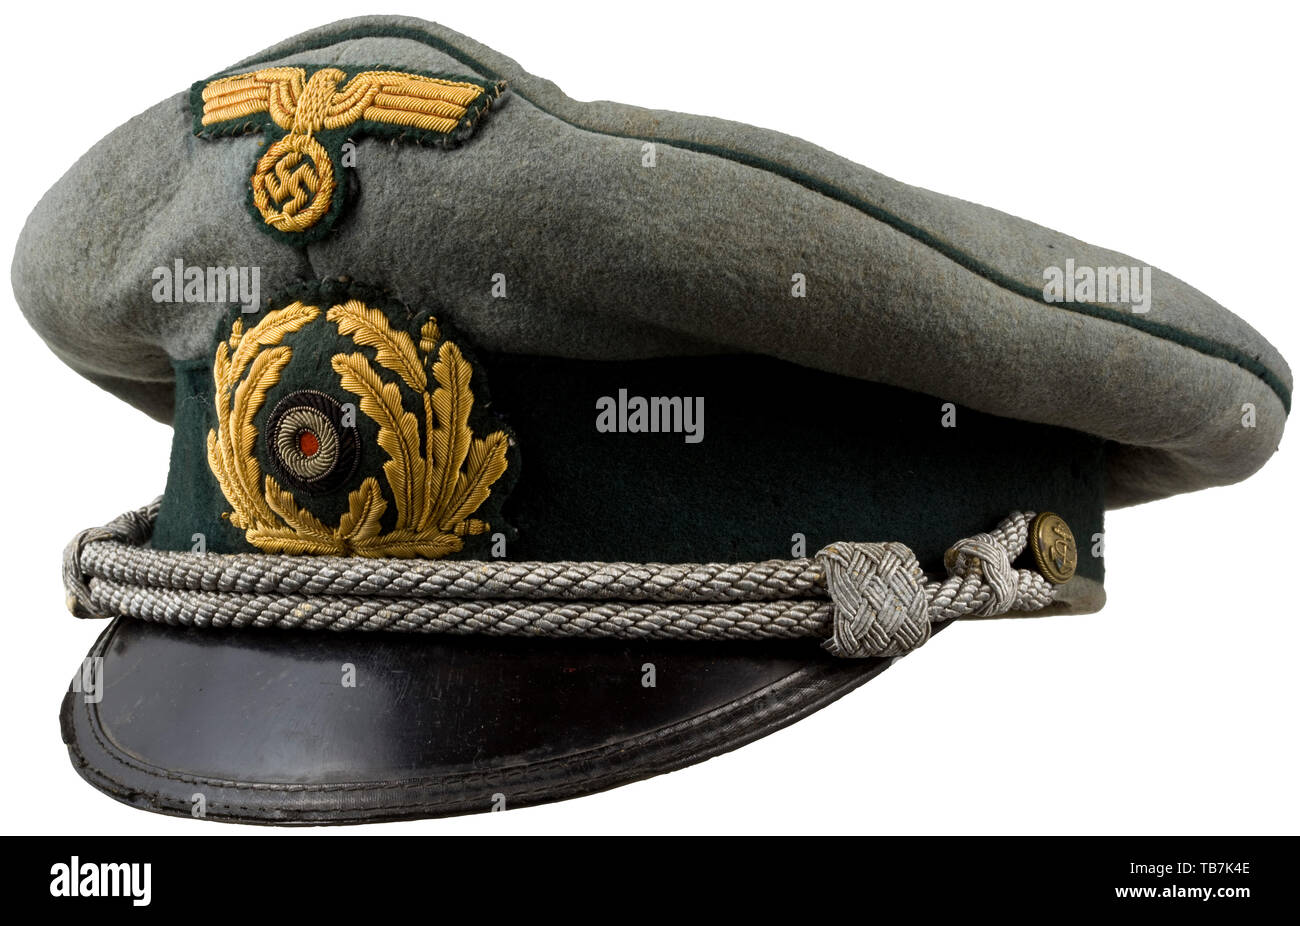 A visor cap to the field-grey uniform of officers of the coast artillery, Field-grey wool felt with dark-green cap band and piping, visor lacquered in black, yellow silk lining with cap trapezoid (damaged) and brown leather sweatband. Hand-stitched cellon insignia embroidered in gold on dark-green cloth, silver cap cord attached to golden anchor buttons. Frequently worn cap with unquestionable patina. navy, naval forces, military, militaria, branch of service, branches of service, armed forces, armed service, object, objects, stills, clipping, clippings, cut out, cut-out, c, Editorial-Use-Only Stock Photo